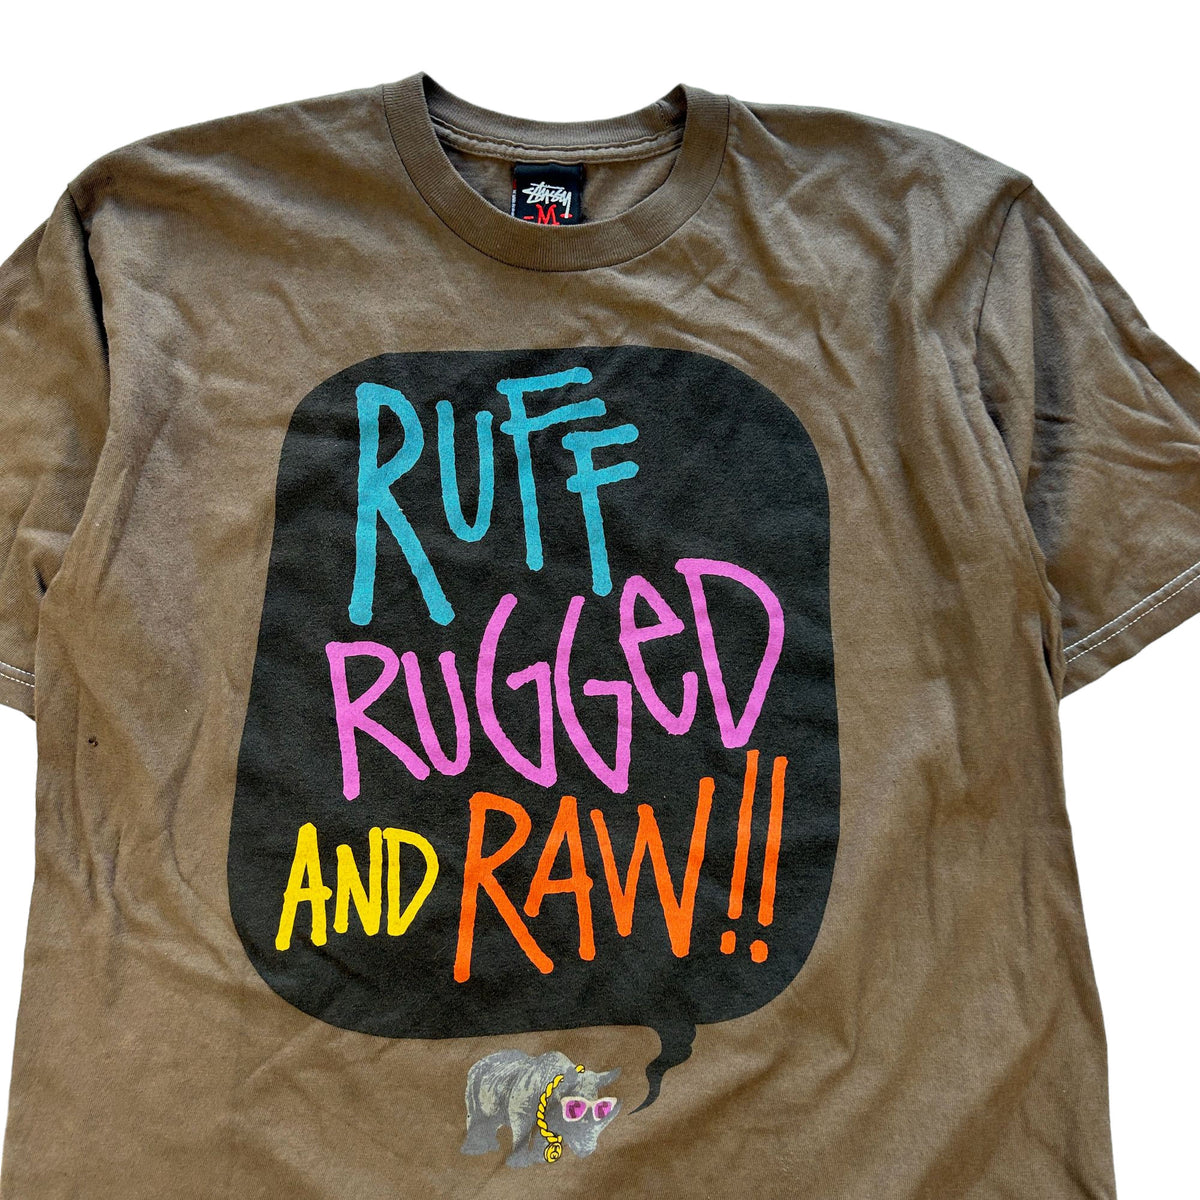 Vintage Stussy Ruff Rugged and Raw Graphic T Shirt Size M